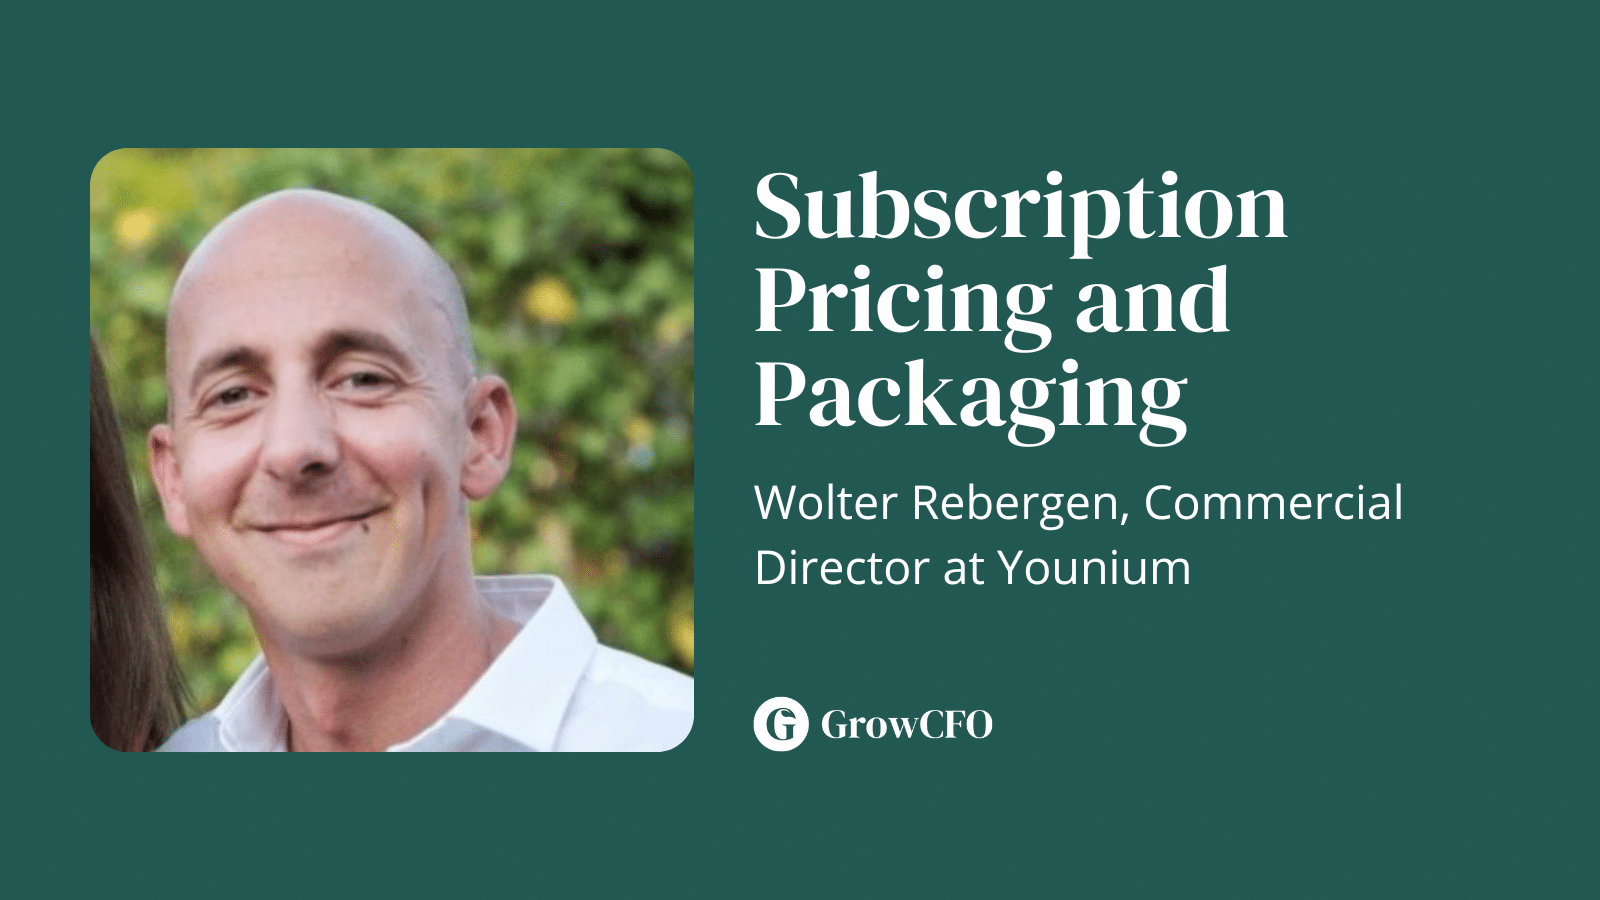 Subscription pricing and packaging